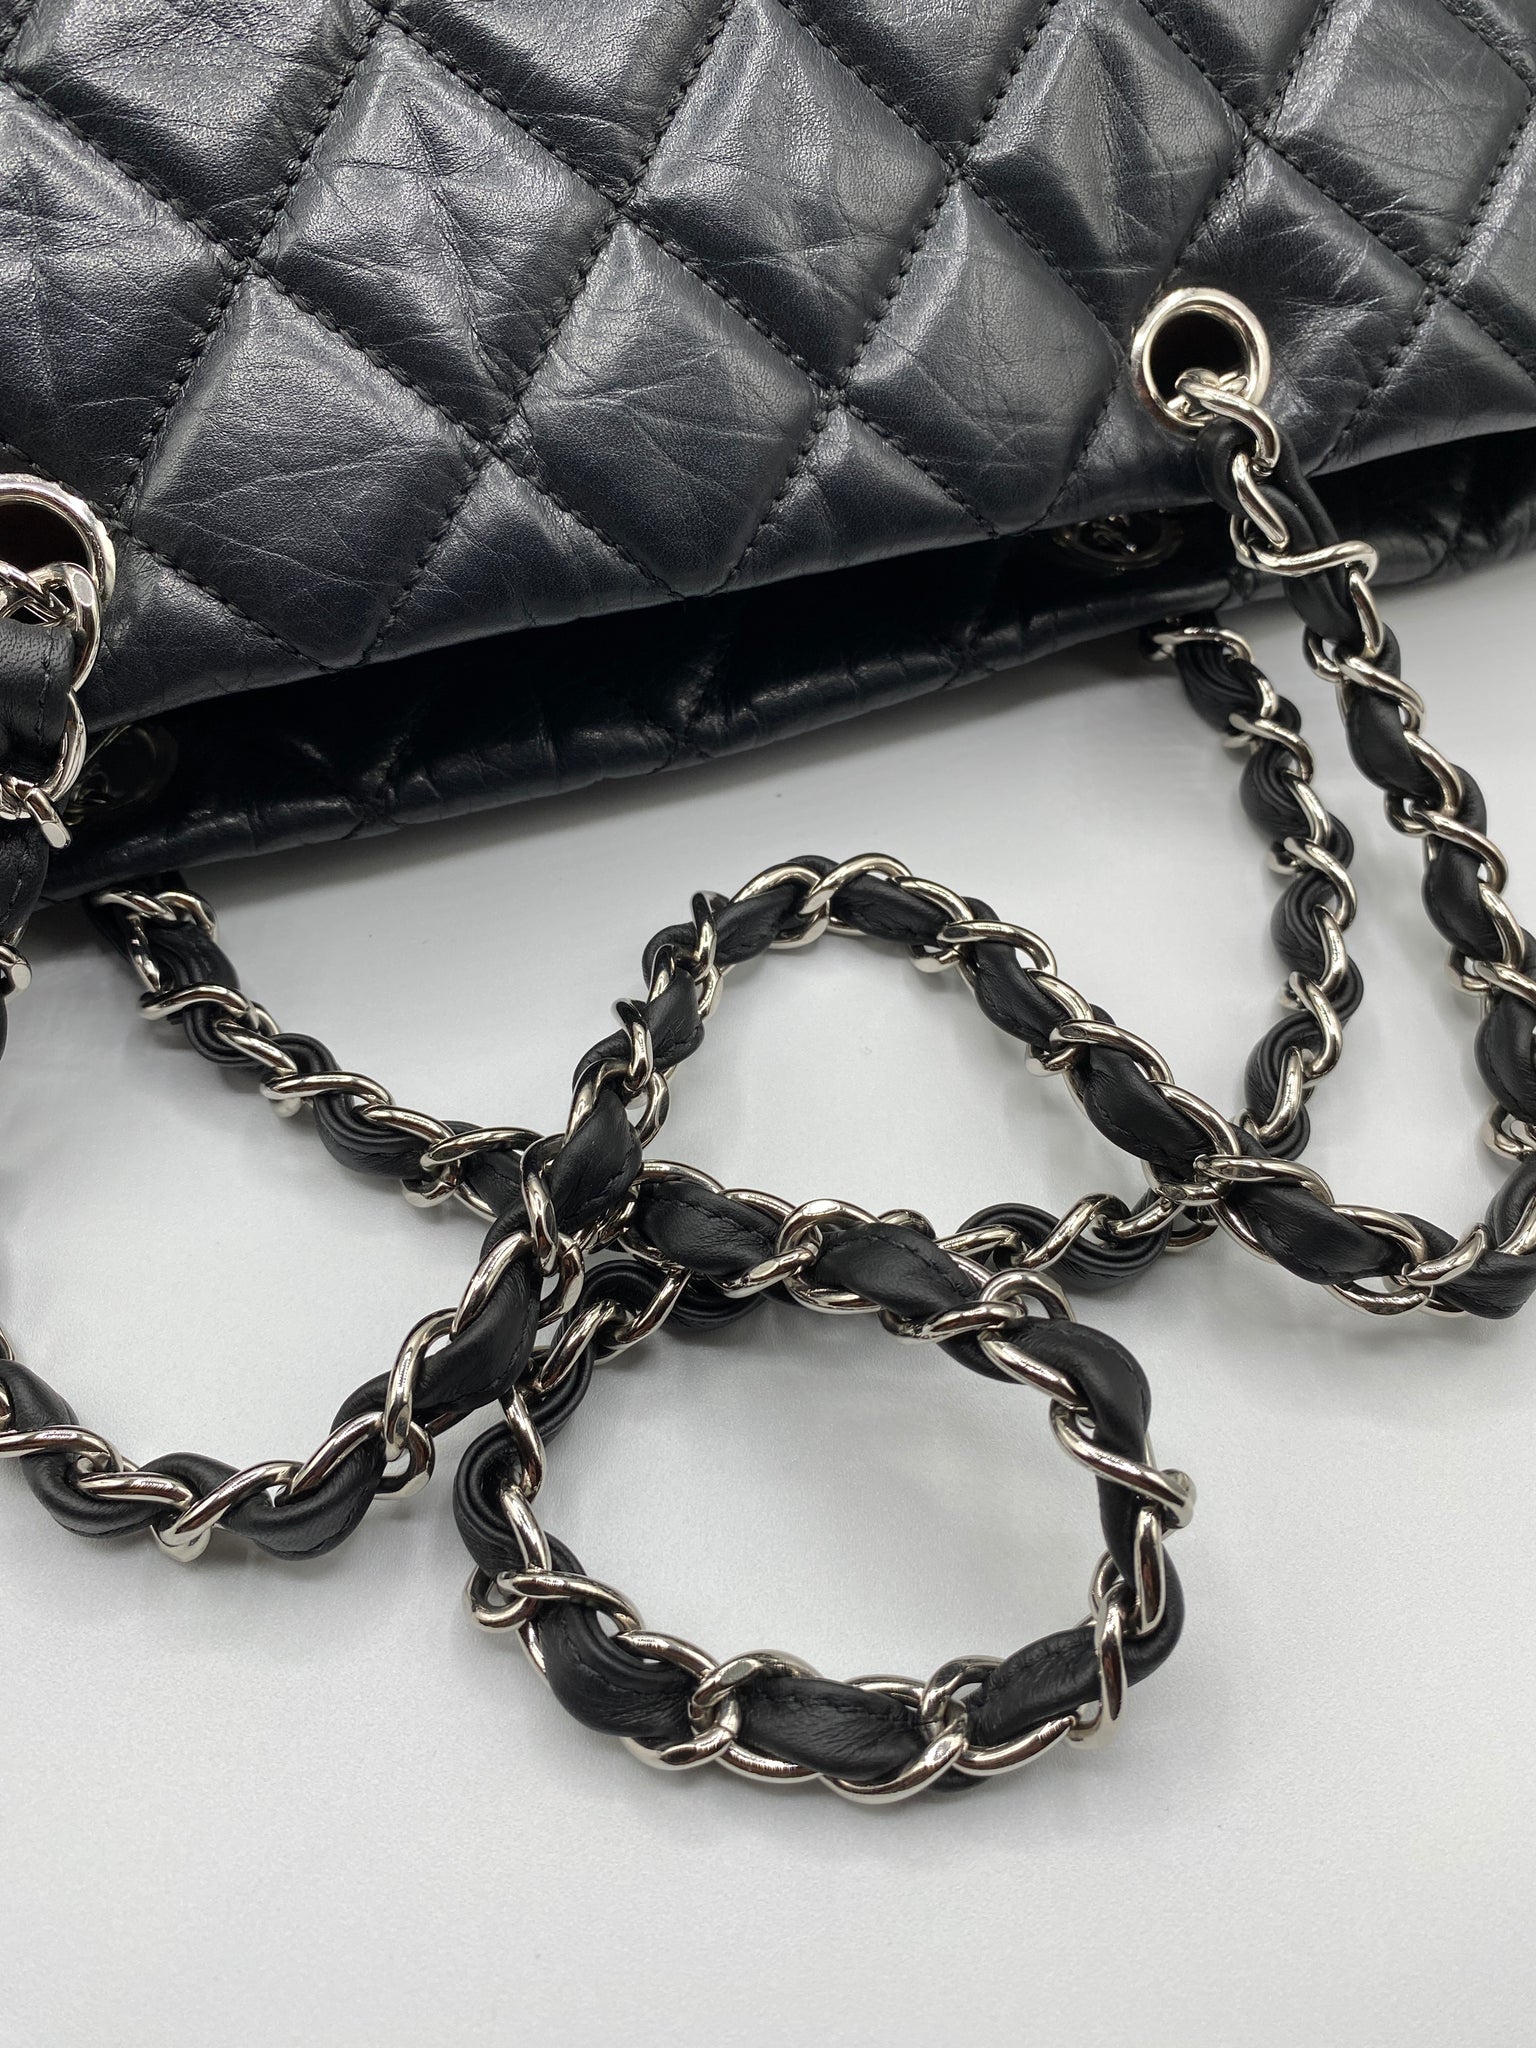 CHANEL MEDALLION TOTE - Review, what fits inside, pricing, mod